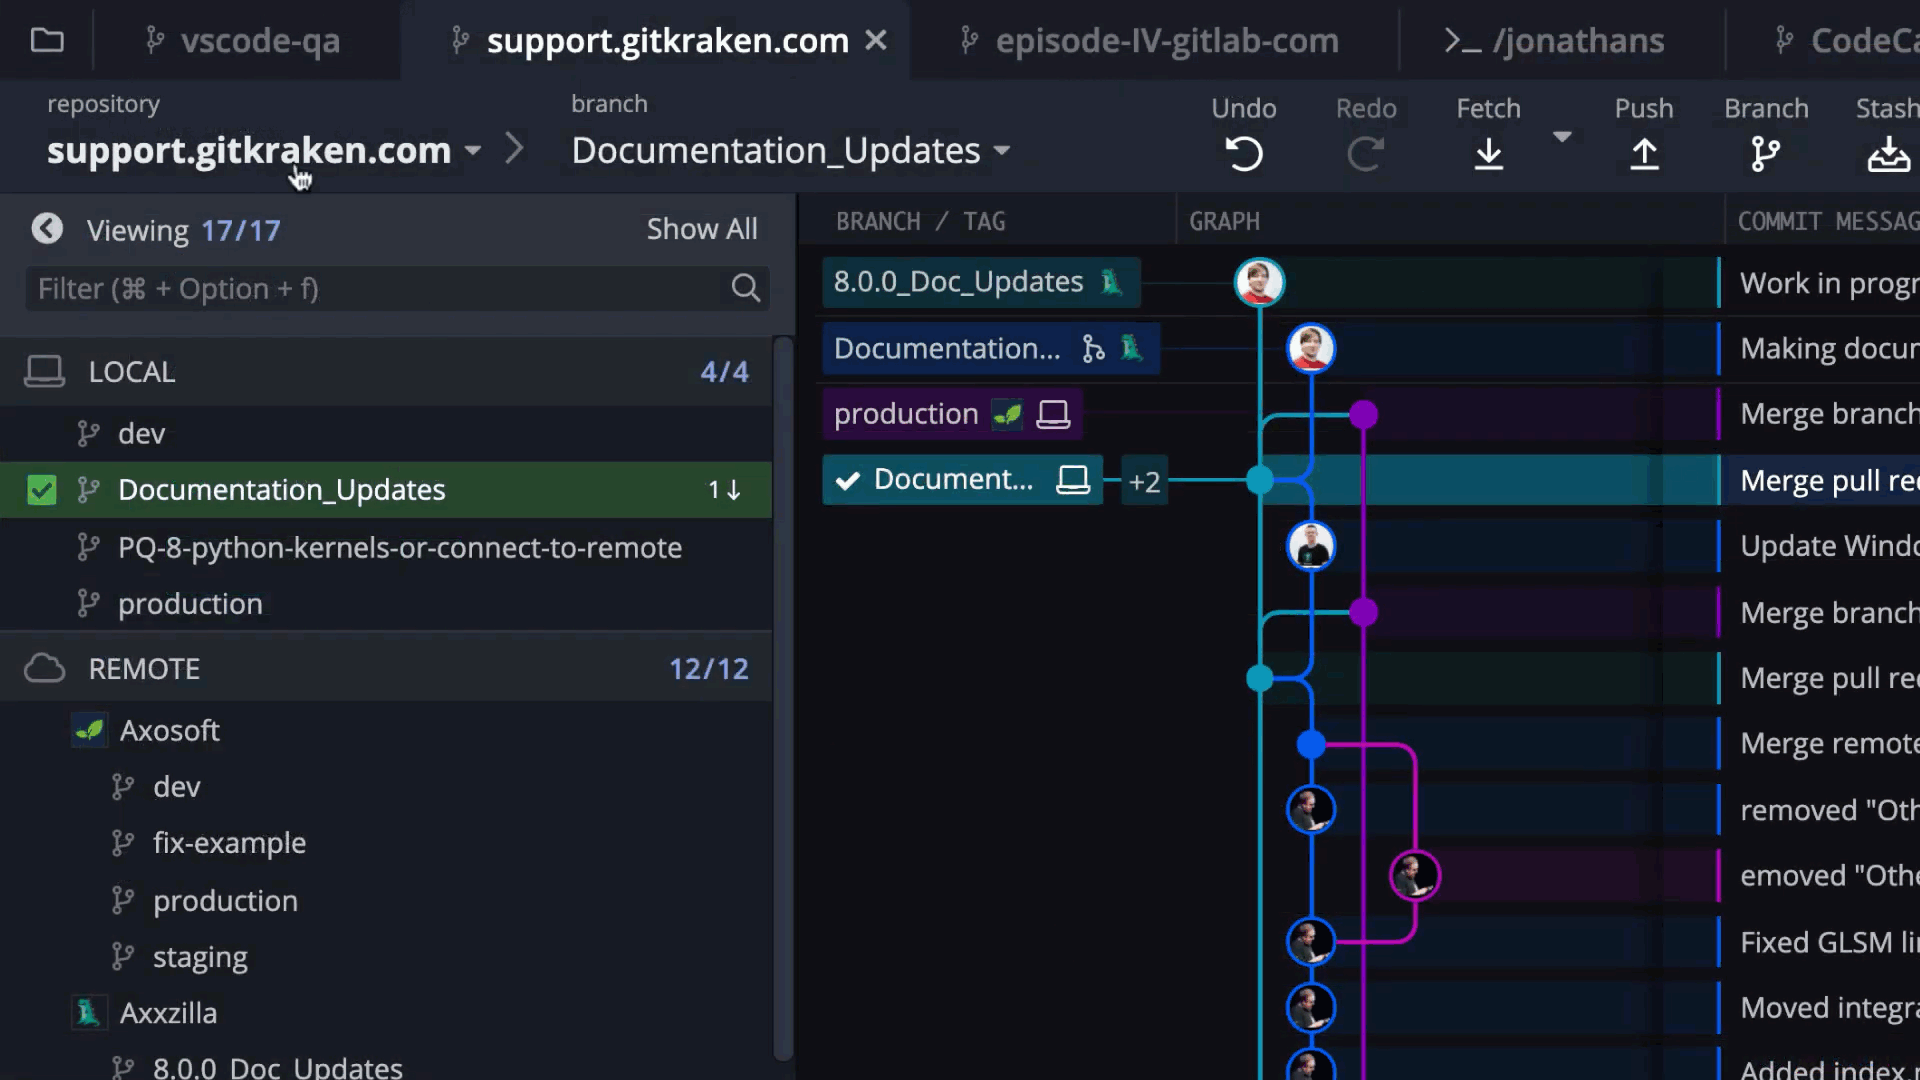 Improved GitKraken Tabs experience  with the Tabs dropdown list